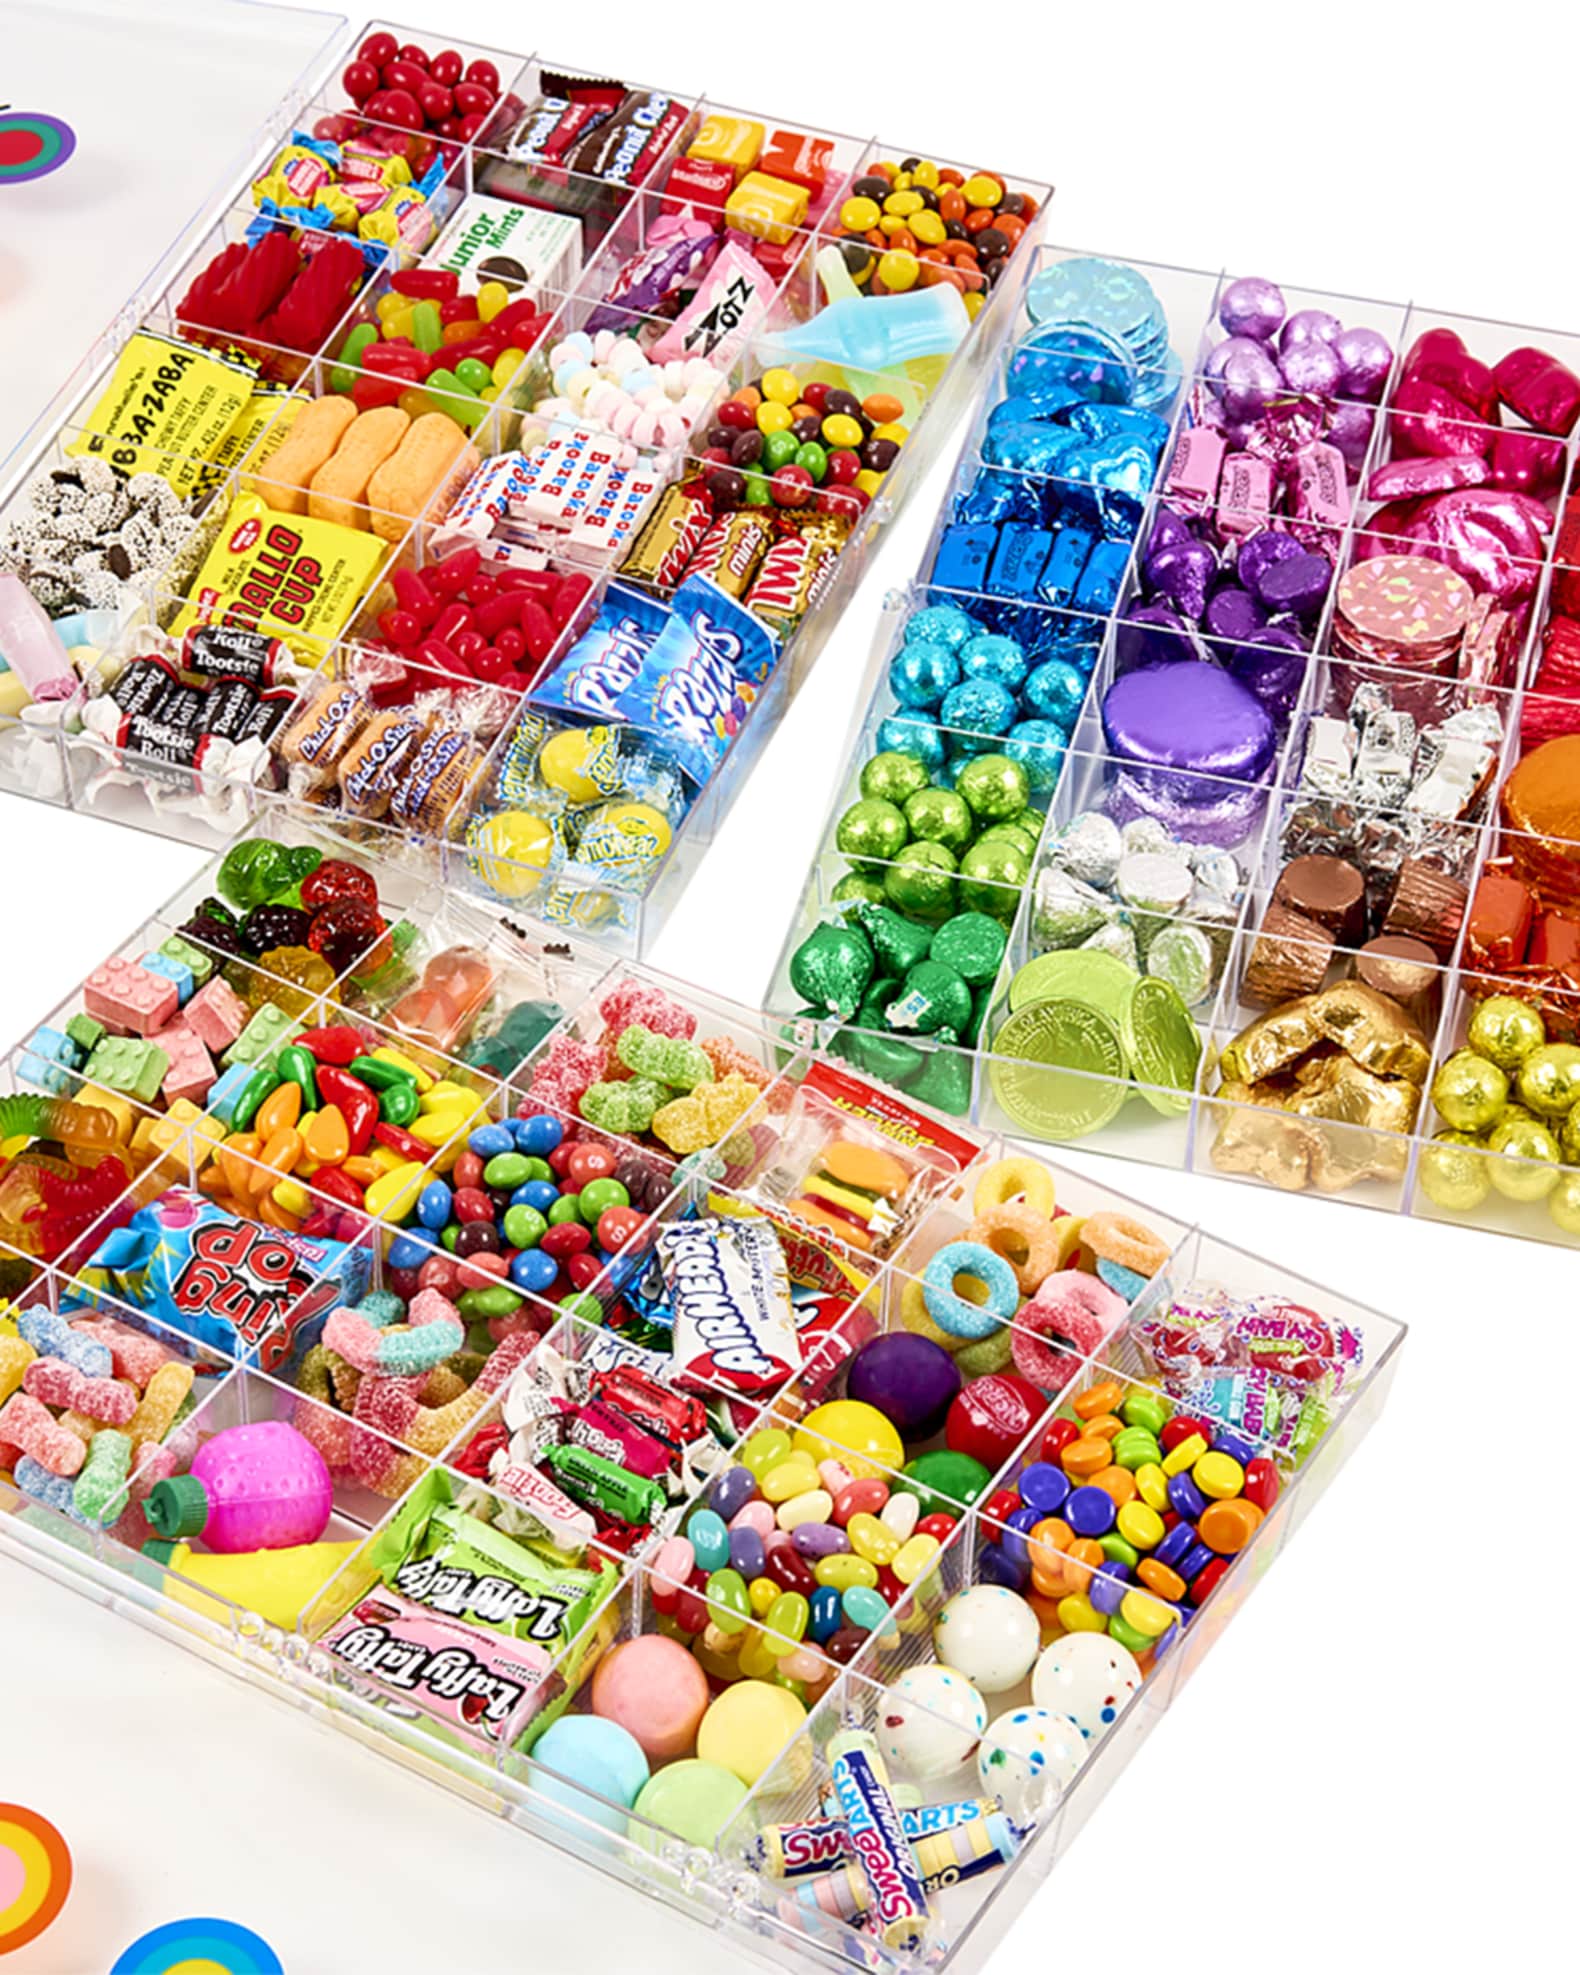 Dylan's Candy Bar Easter Tackle Box